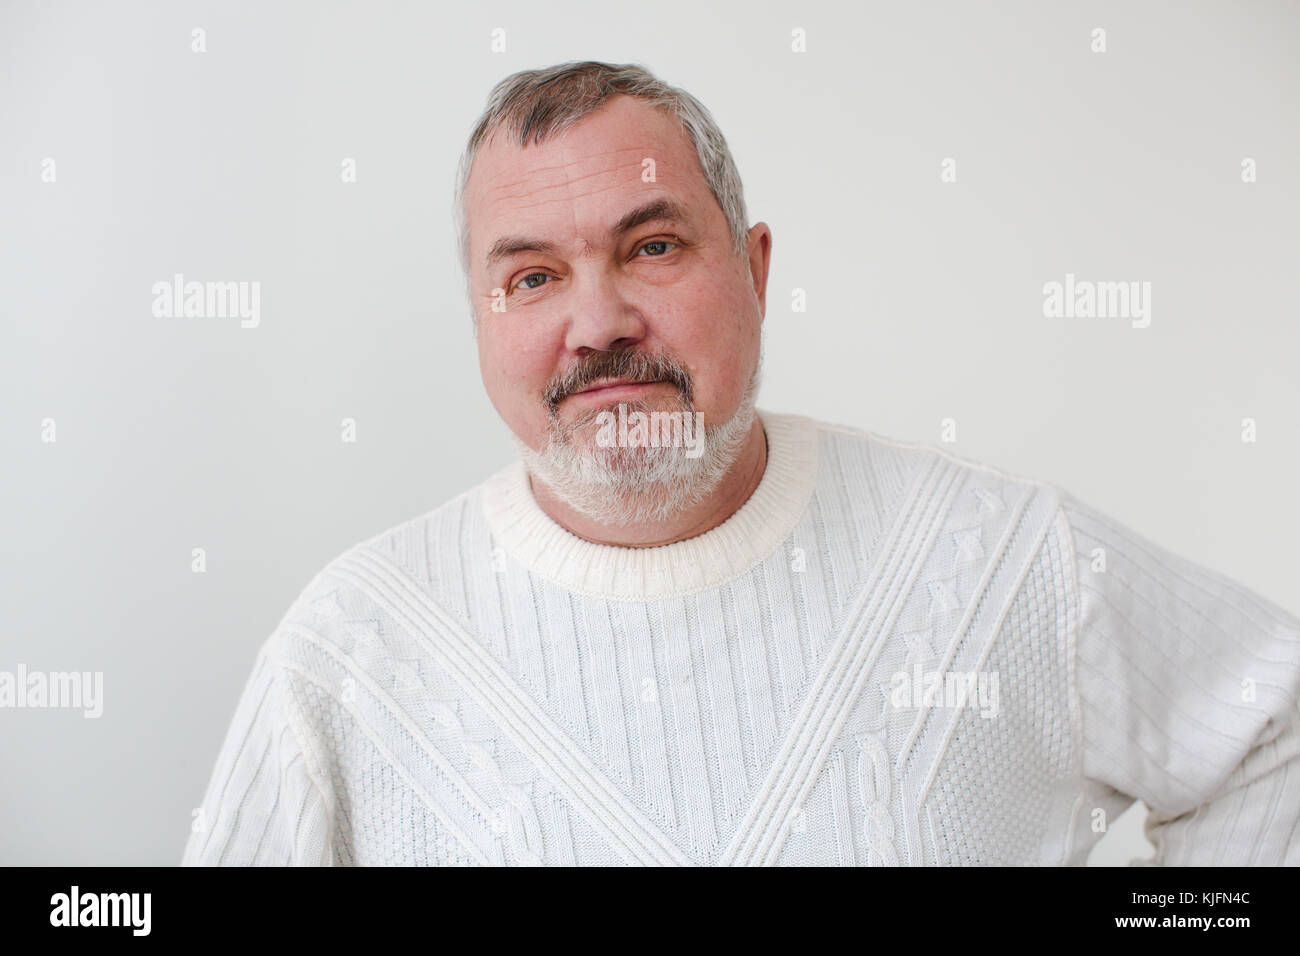 Middle aged bearded man looking at camera smiling Stock Photo